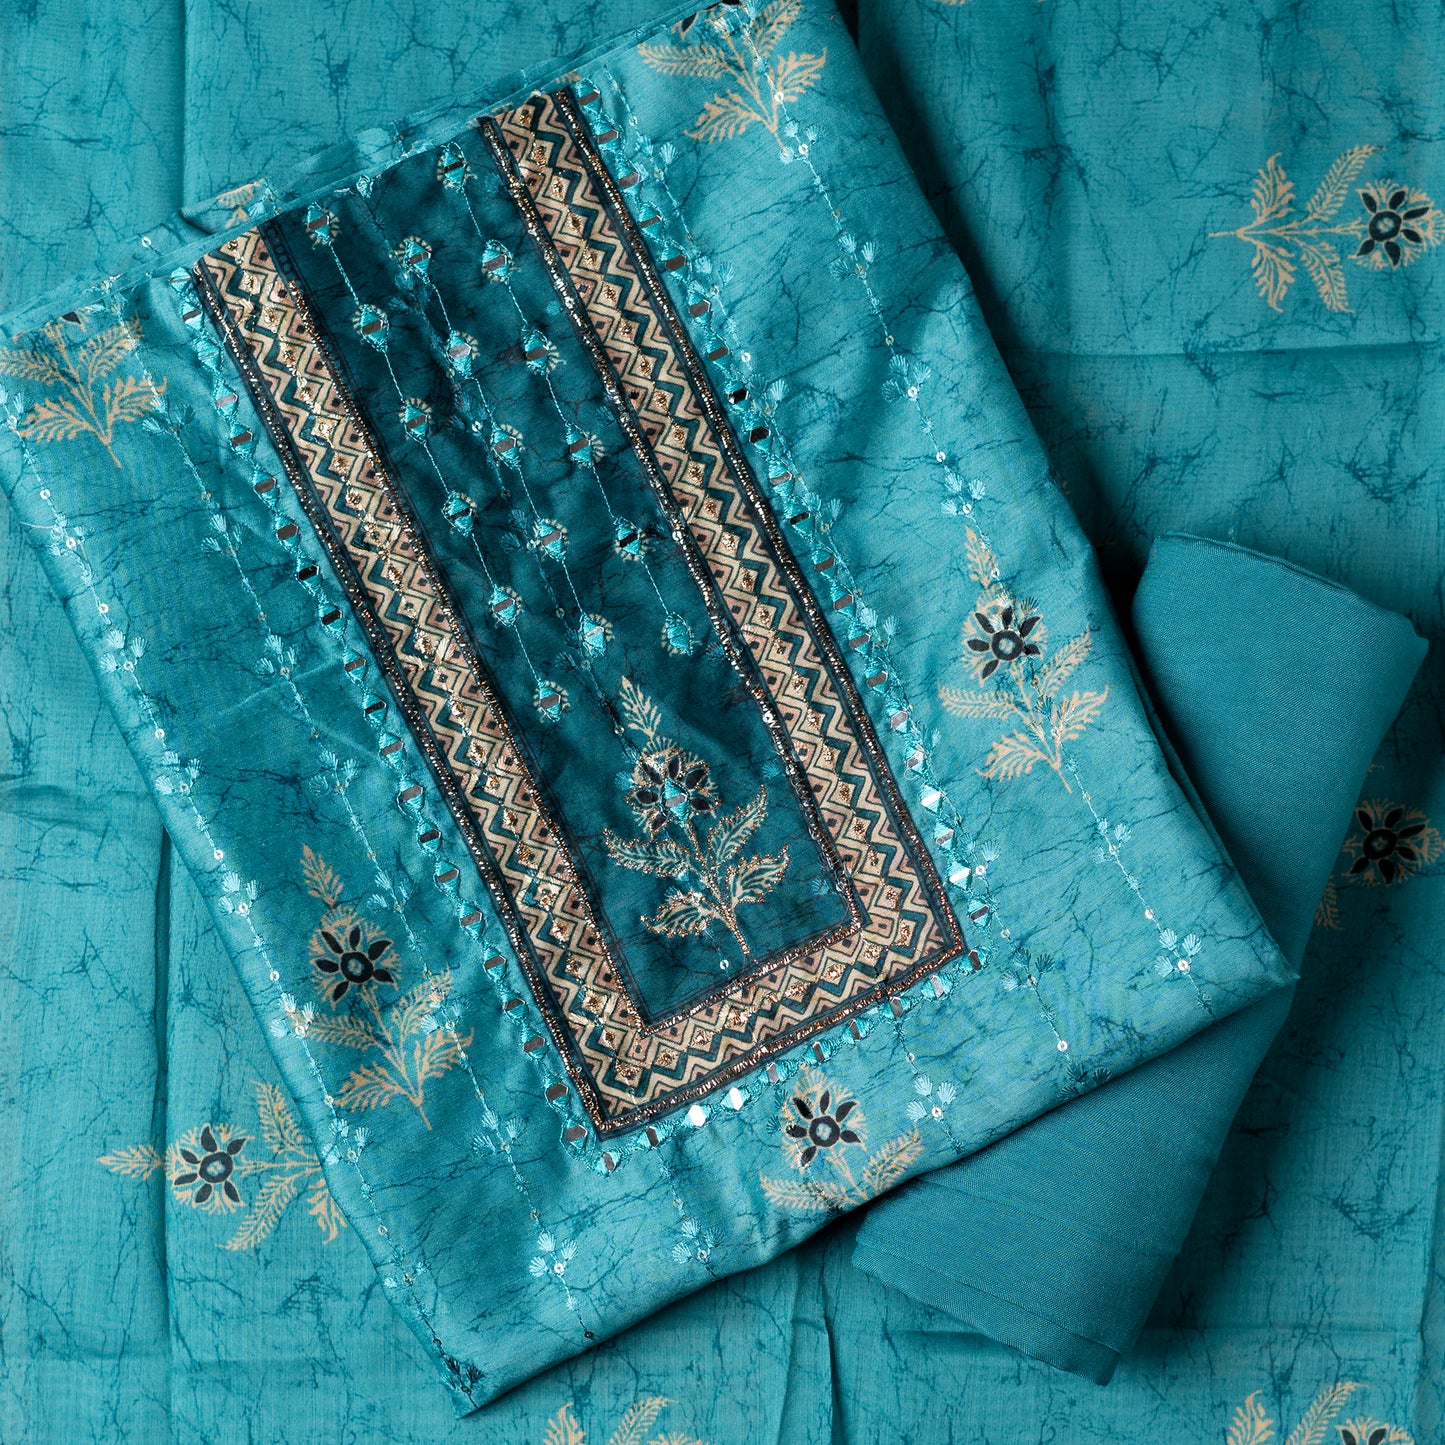 Chanderi silk dress material with print design, embroidery work, thread work and sequins work. It has zari and mirror work in neck area also. Silk dupatta with beautiful digital prints matching the top color. Cotton silk bottom same teal blue color as the top and dupatta. 